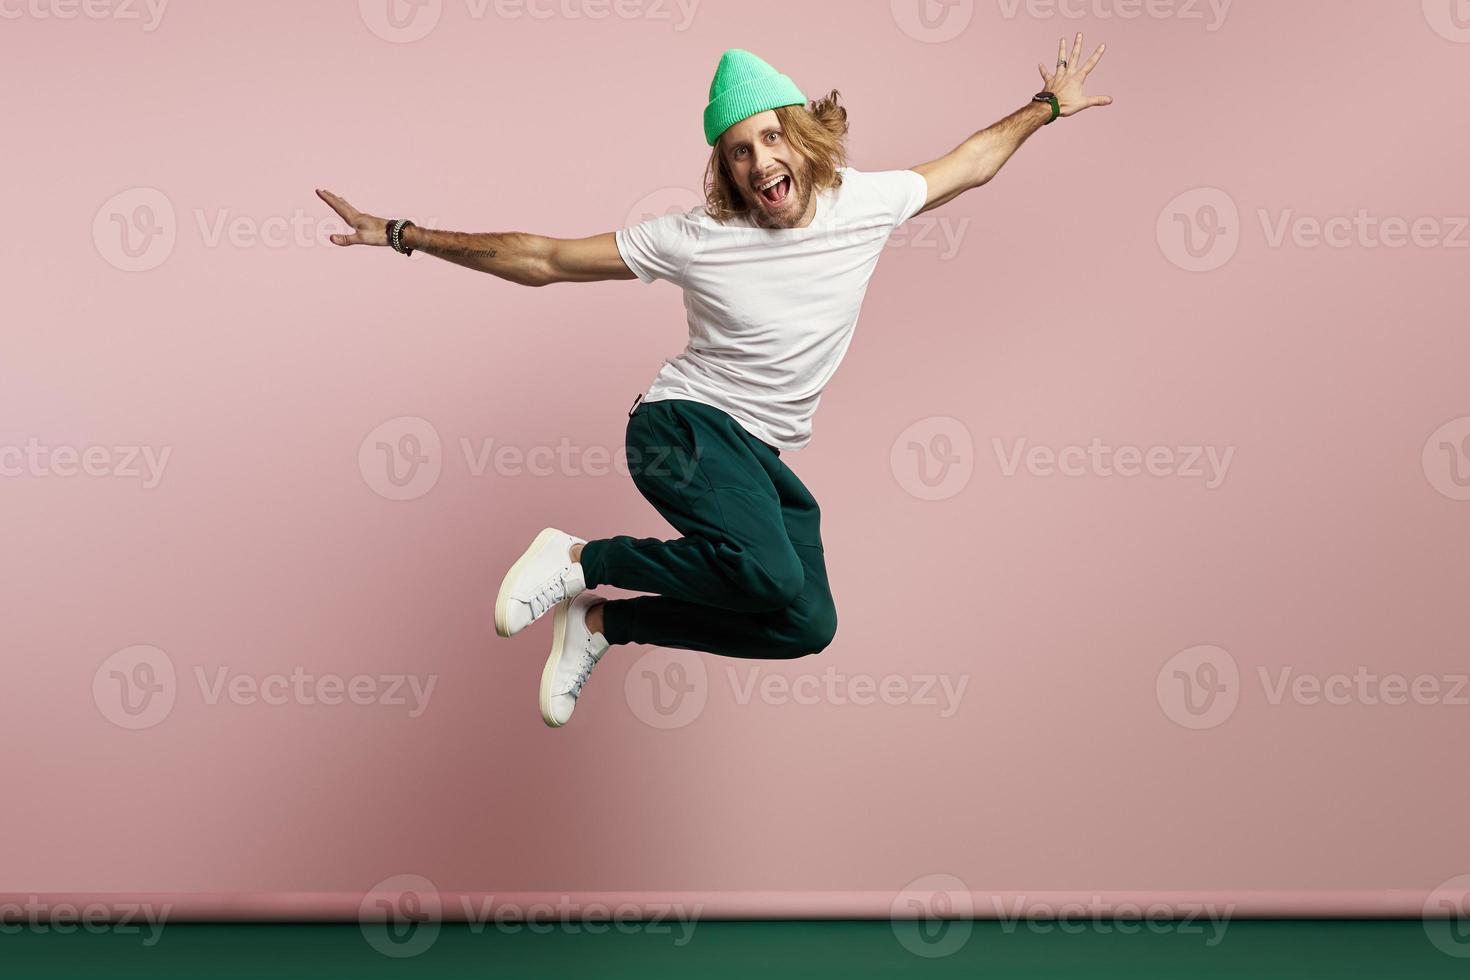 Handsome young man looking happy while jumping against colorful background photo